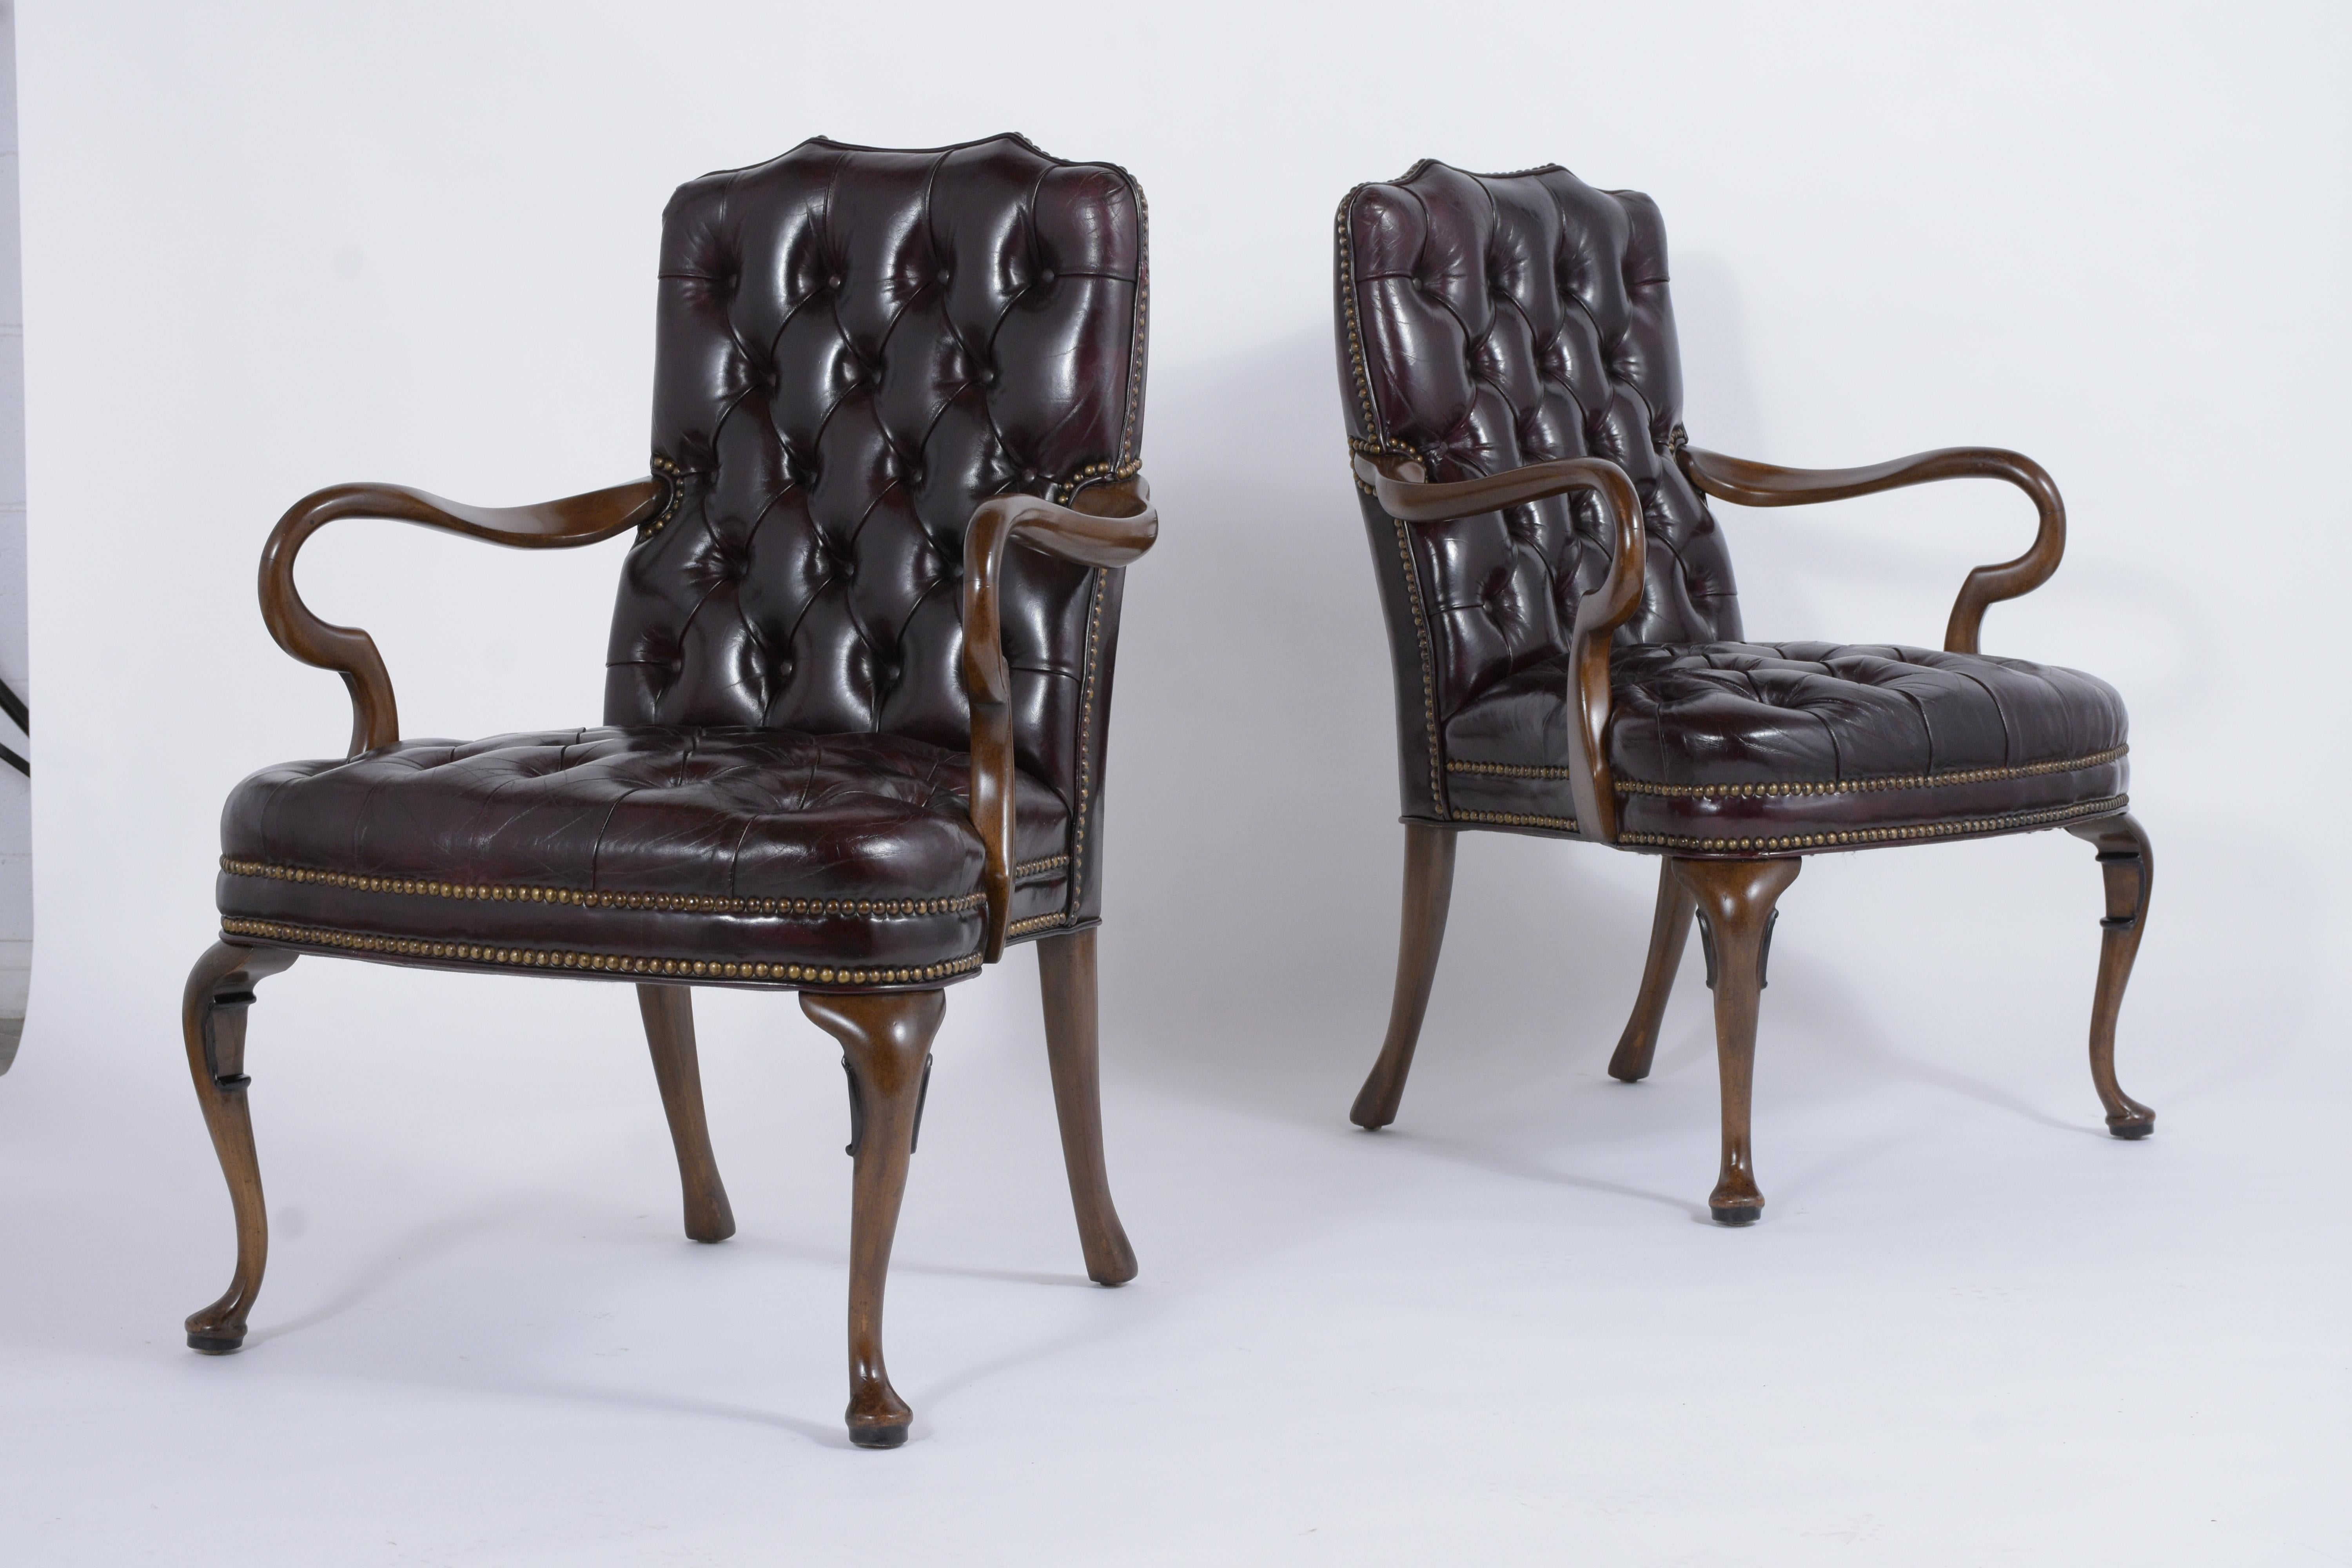 A pair of 1950s Chesterfield style office chairs crafted out of mahogany wood finished in a dark walnut color with a newly lacquered finish and are completely restored. These armchairs are upholstered in their original tufted leather, have been